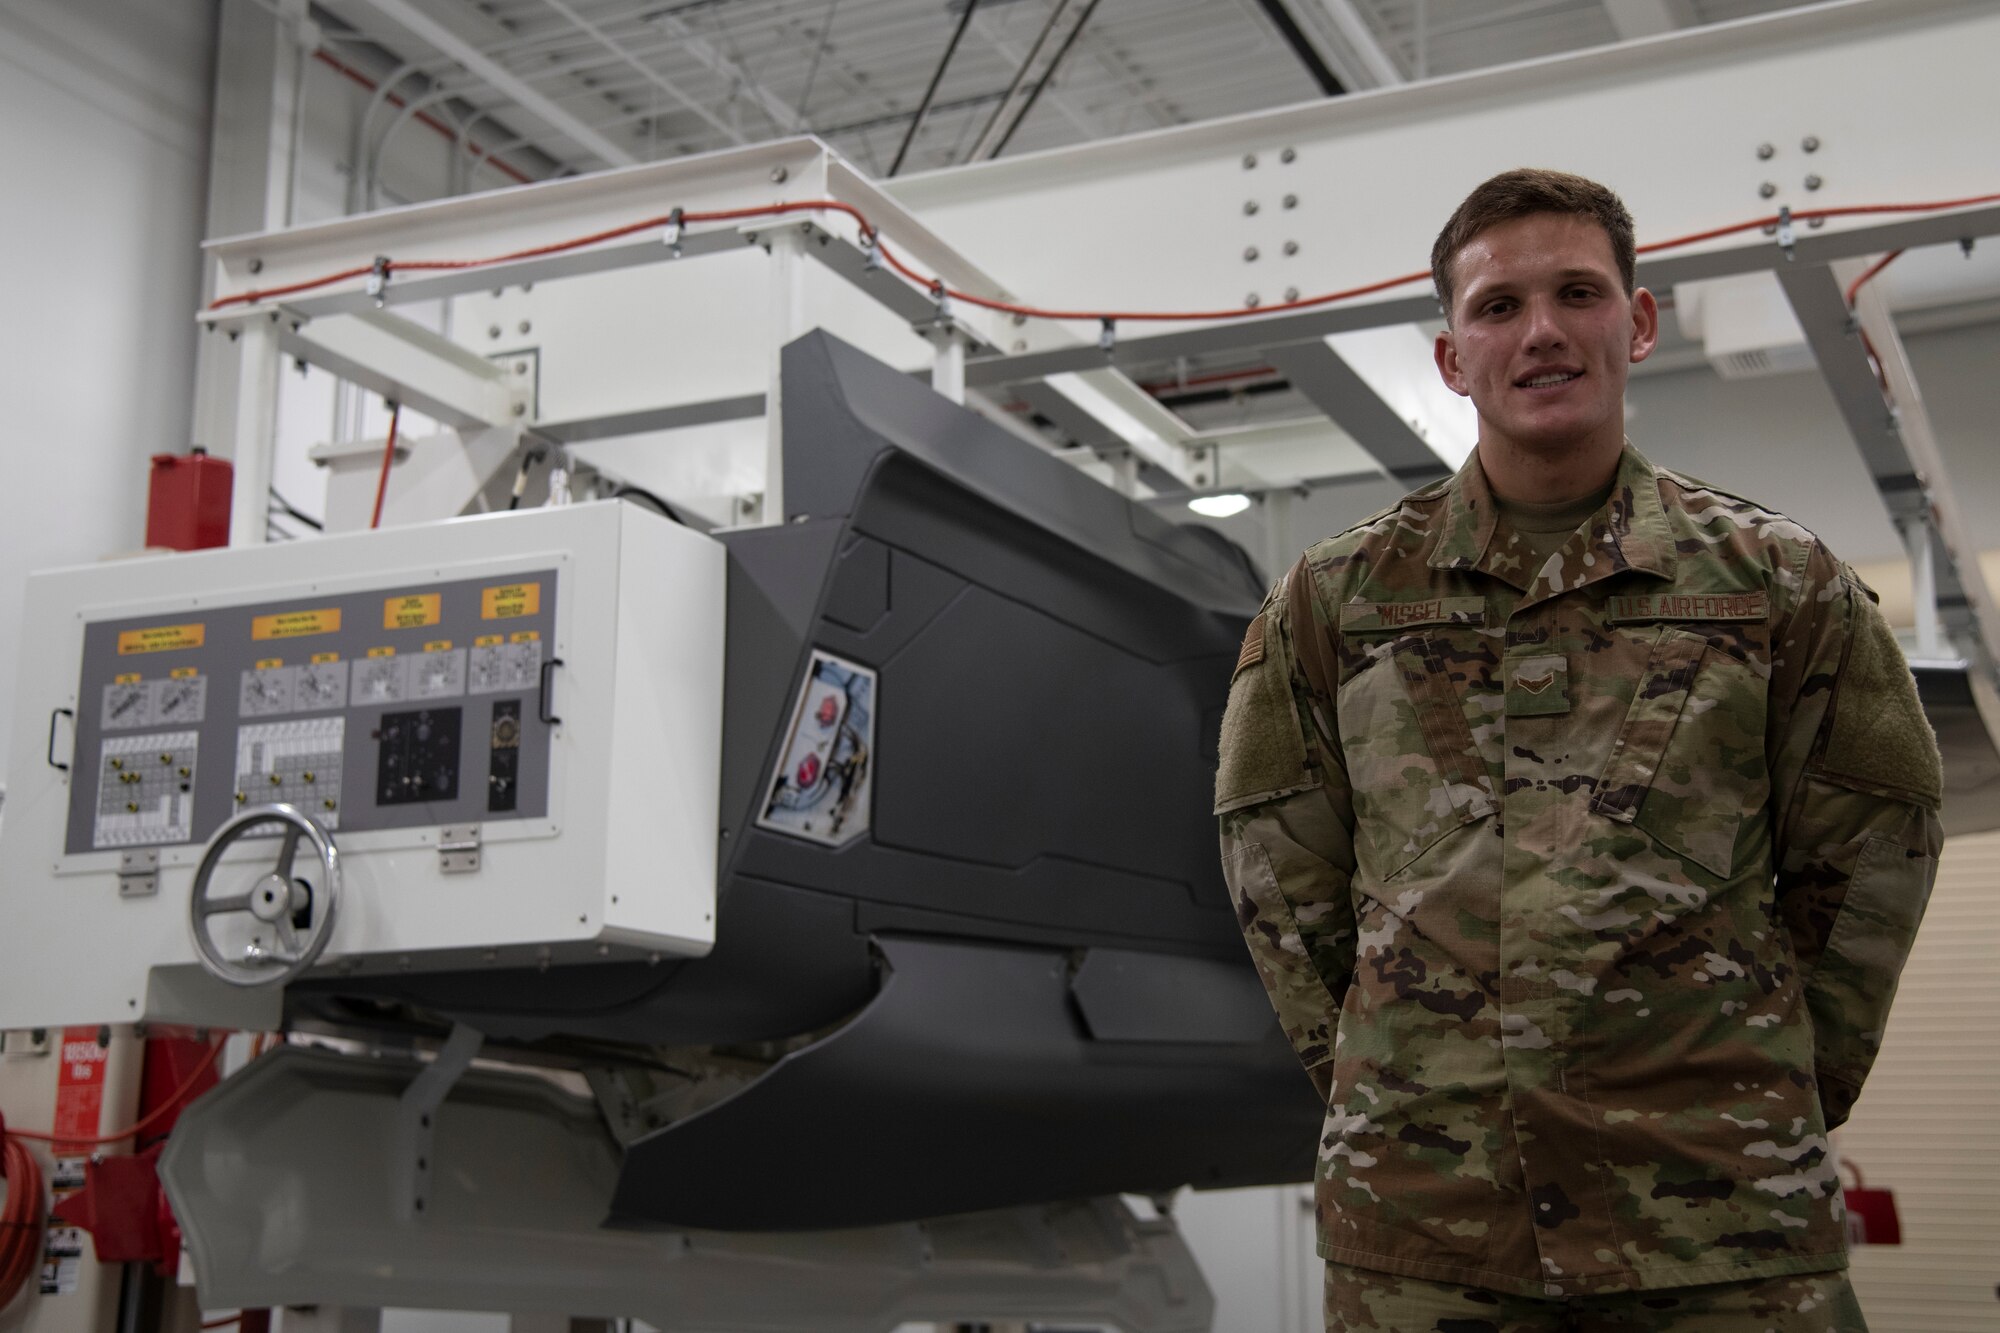 A1C Benjamin Missel poses with a landing gear trainer in the F-35 Academic Training Center, Eglin Air Force Base, Fla. on Mar. 12, 2020.